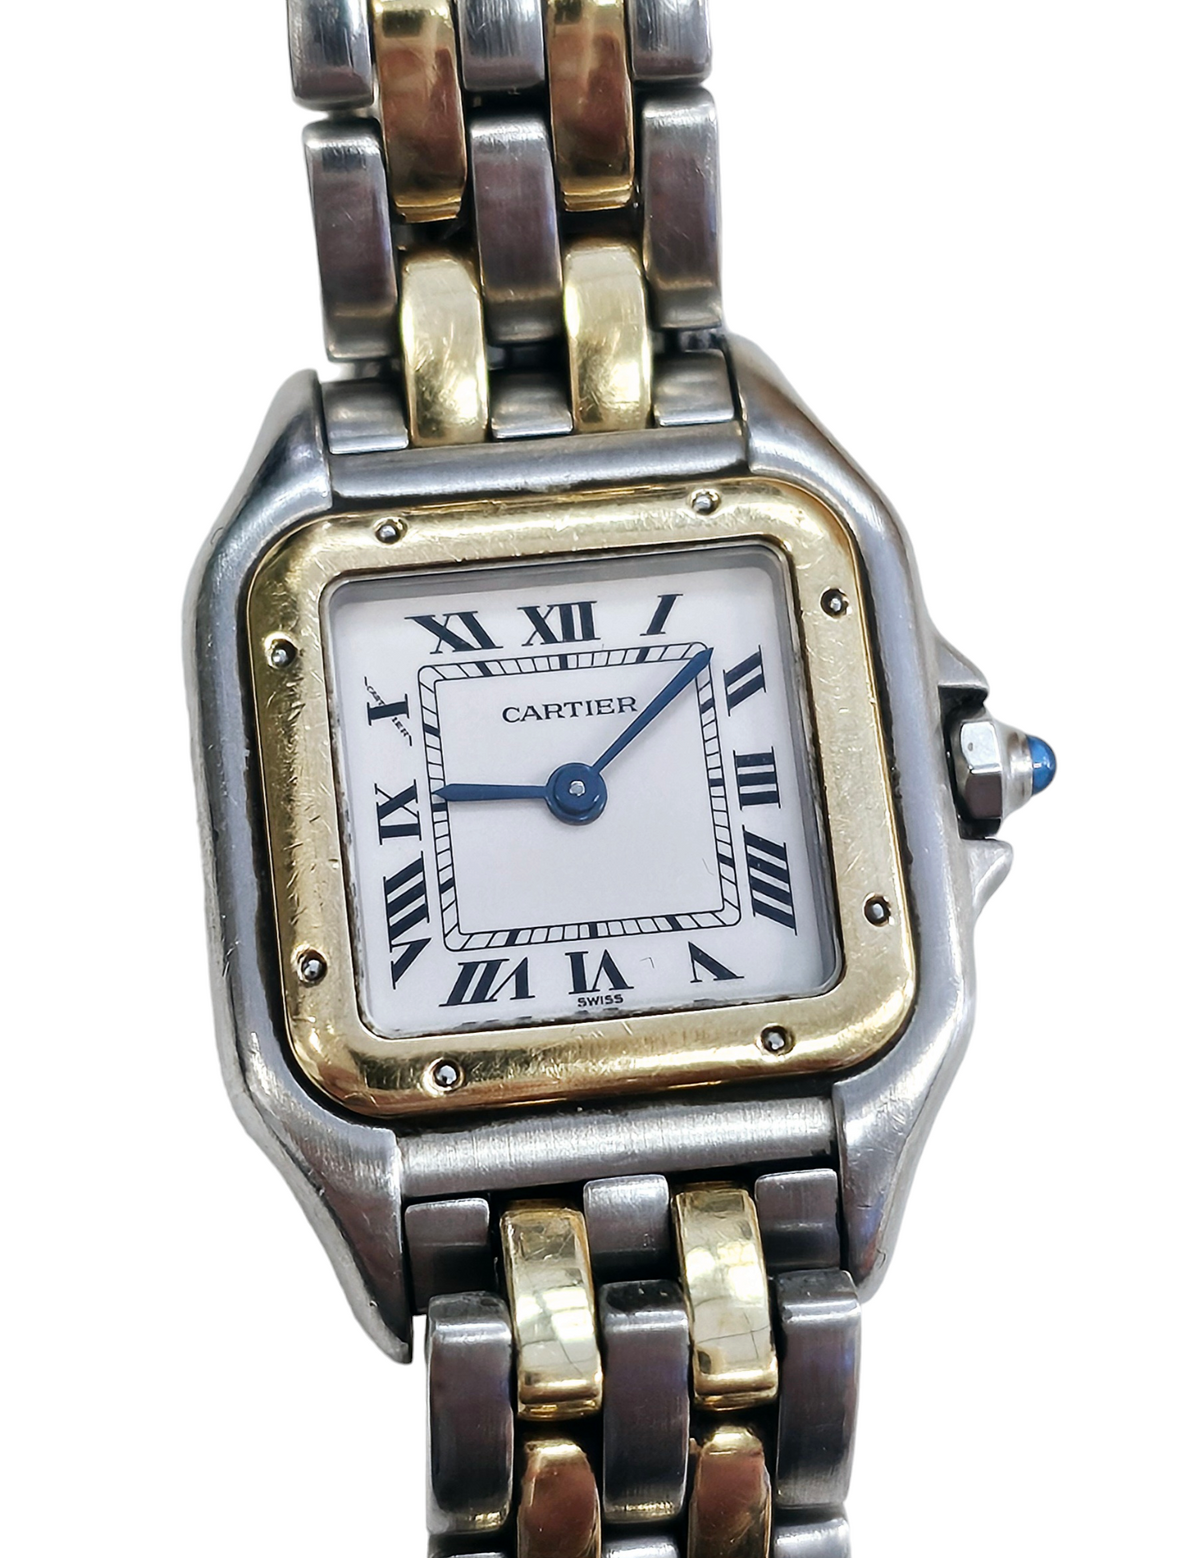 Authentic Small size Cartier Panthere Two-tone watch in SS and 18-karat Yellow Gold